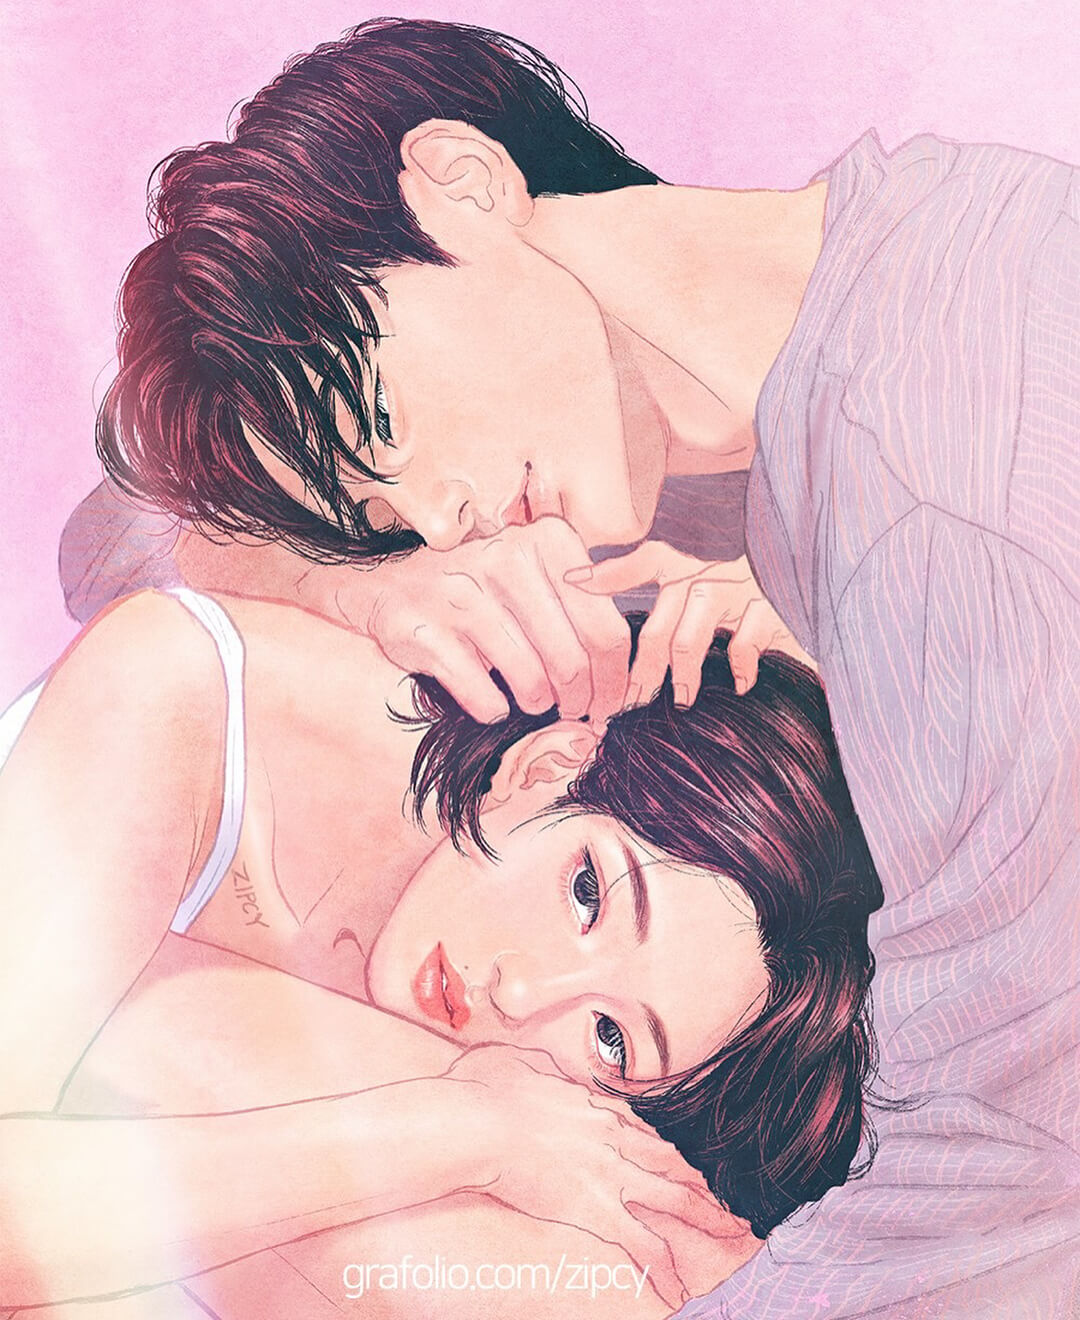 32 Intense Illustrations By Korean Artist Highlight The Tenderness In A Romantic Relationship